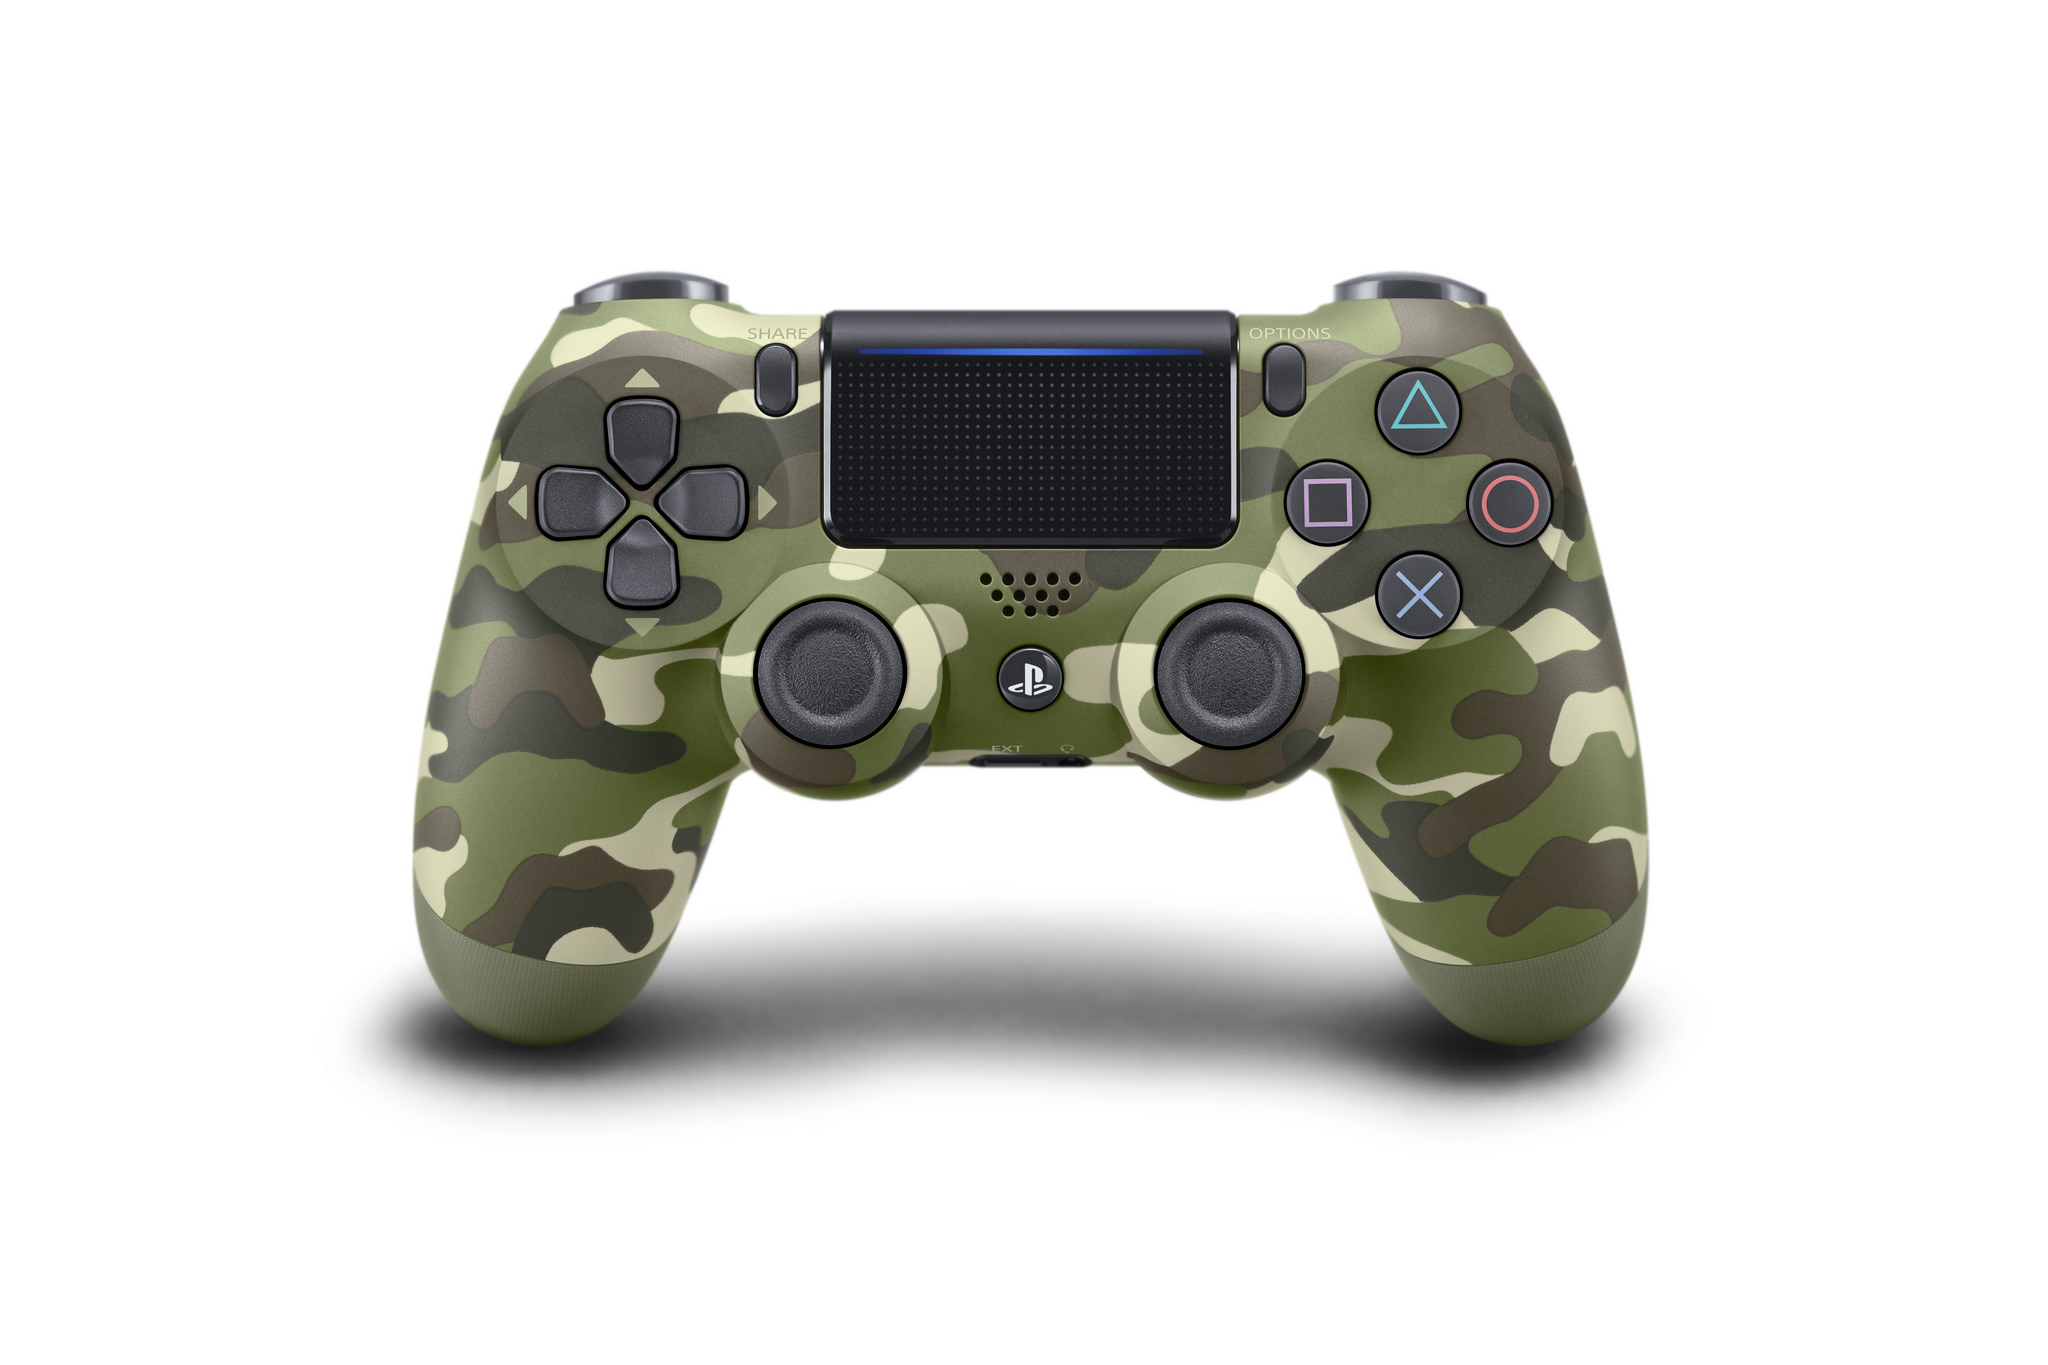 Sony PS4: DualShock 4 Controller V. 2 (NEW, Green Camouflage)